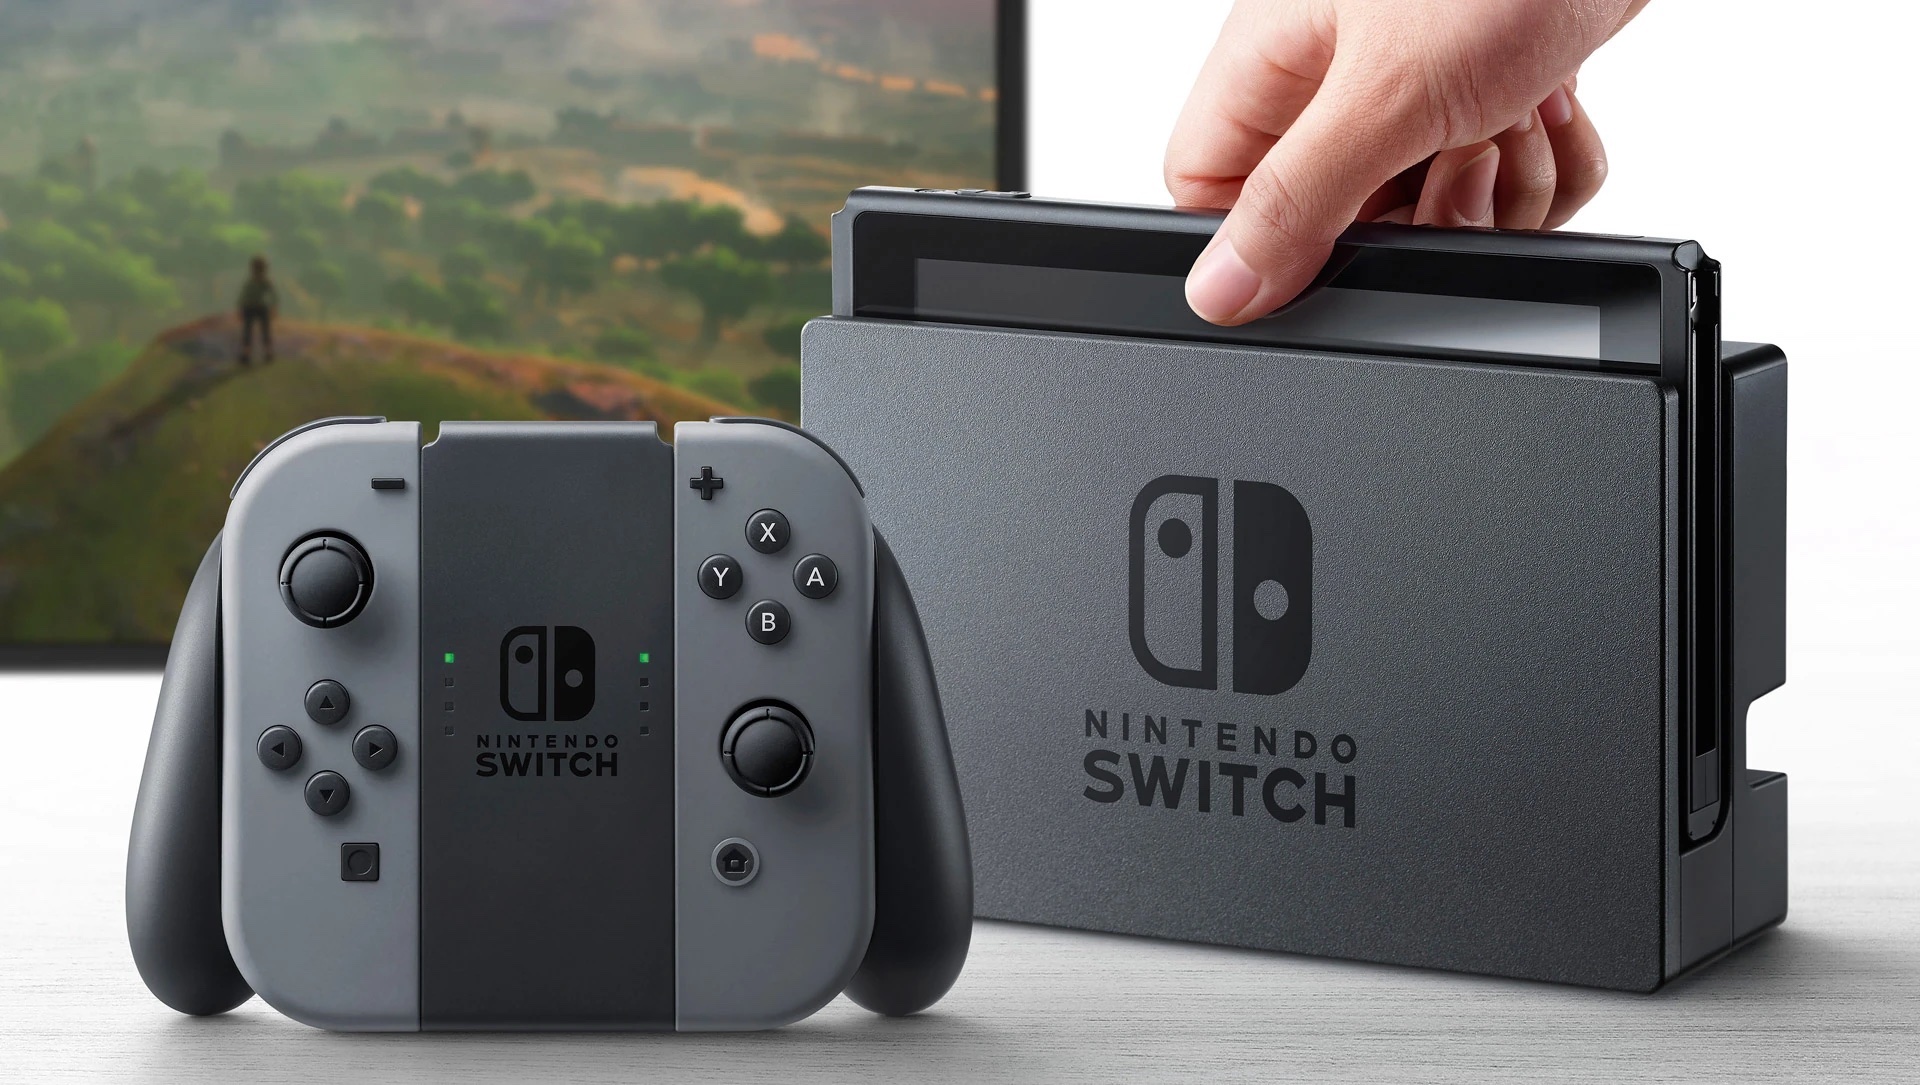 Discover why the Nintendo Switch is Finland's top gaming console, from its hybrid nature to its broad game library and innovative technology.